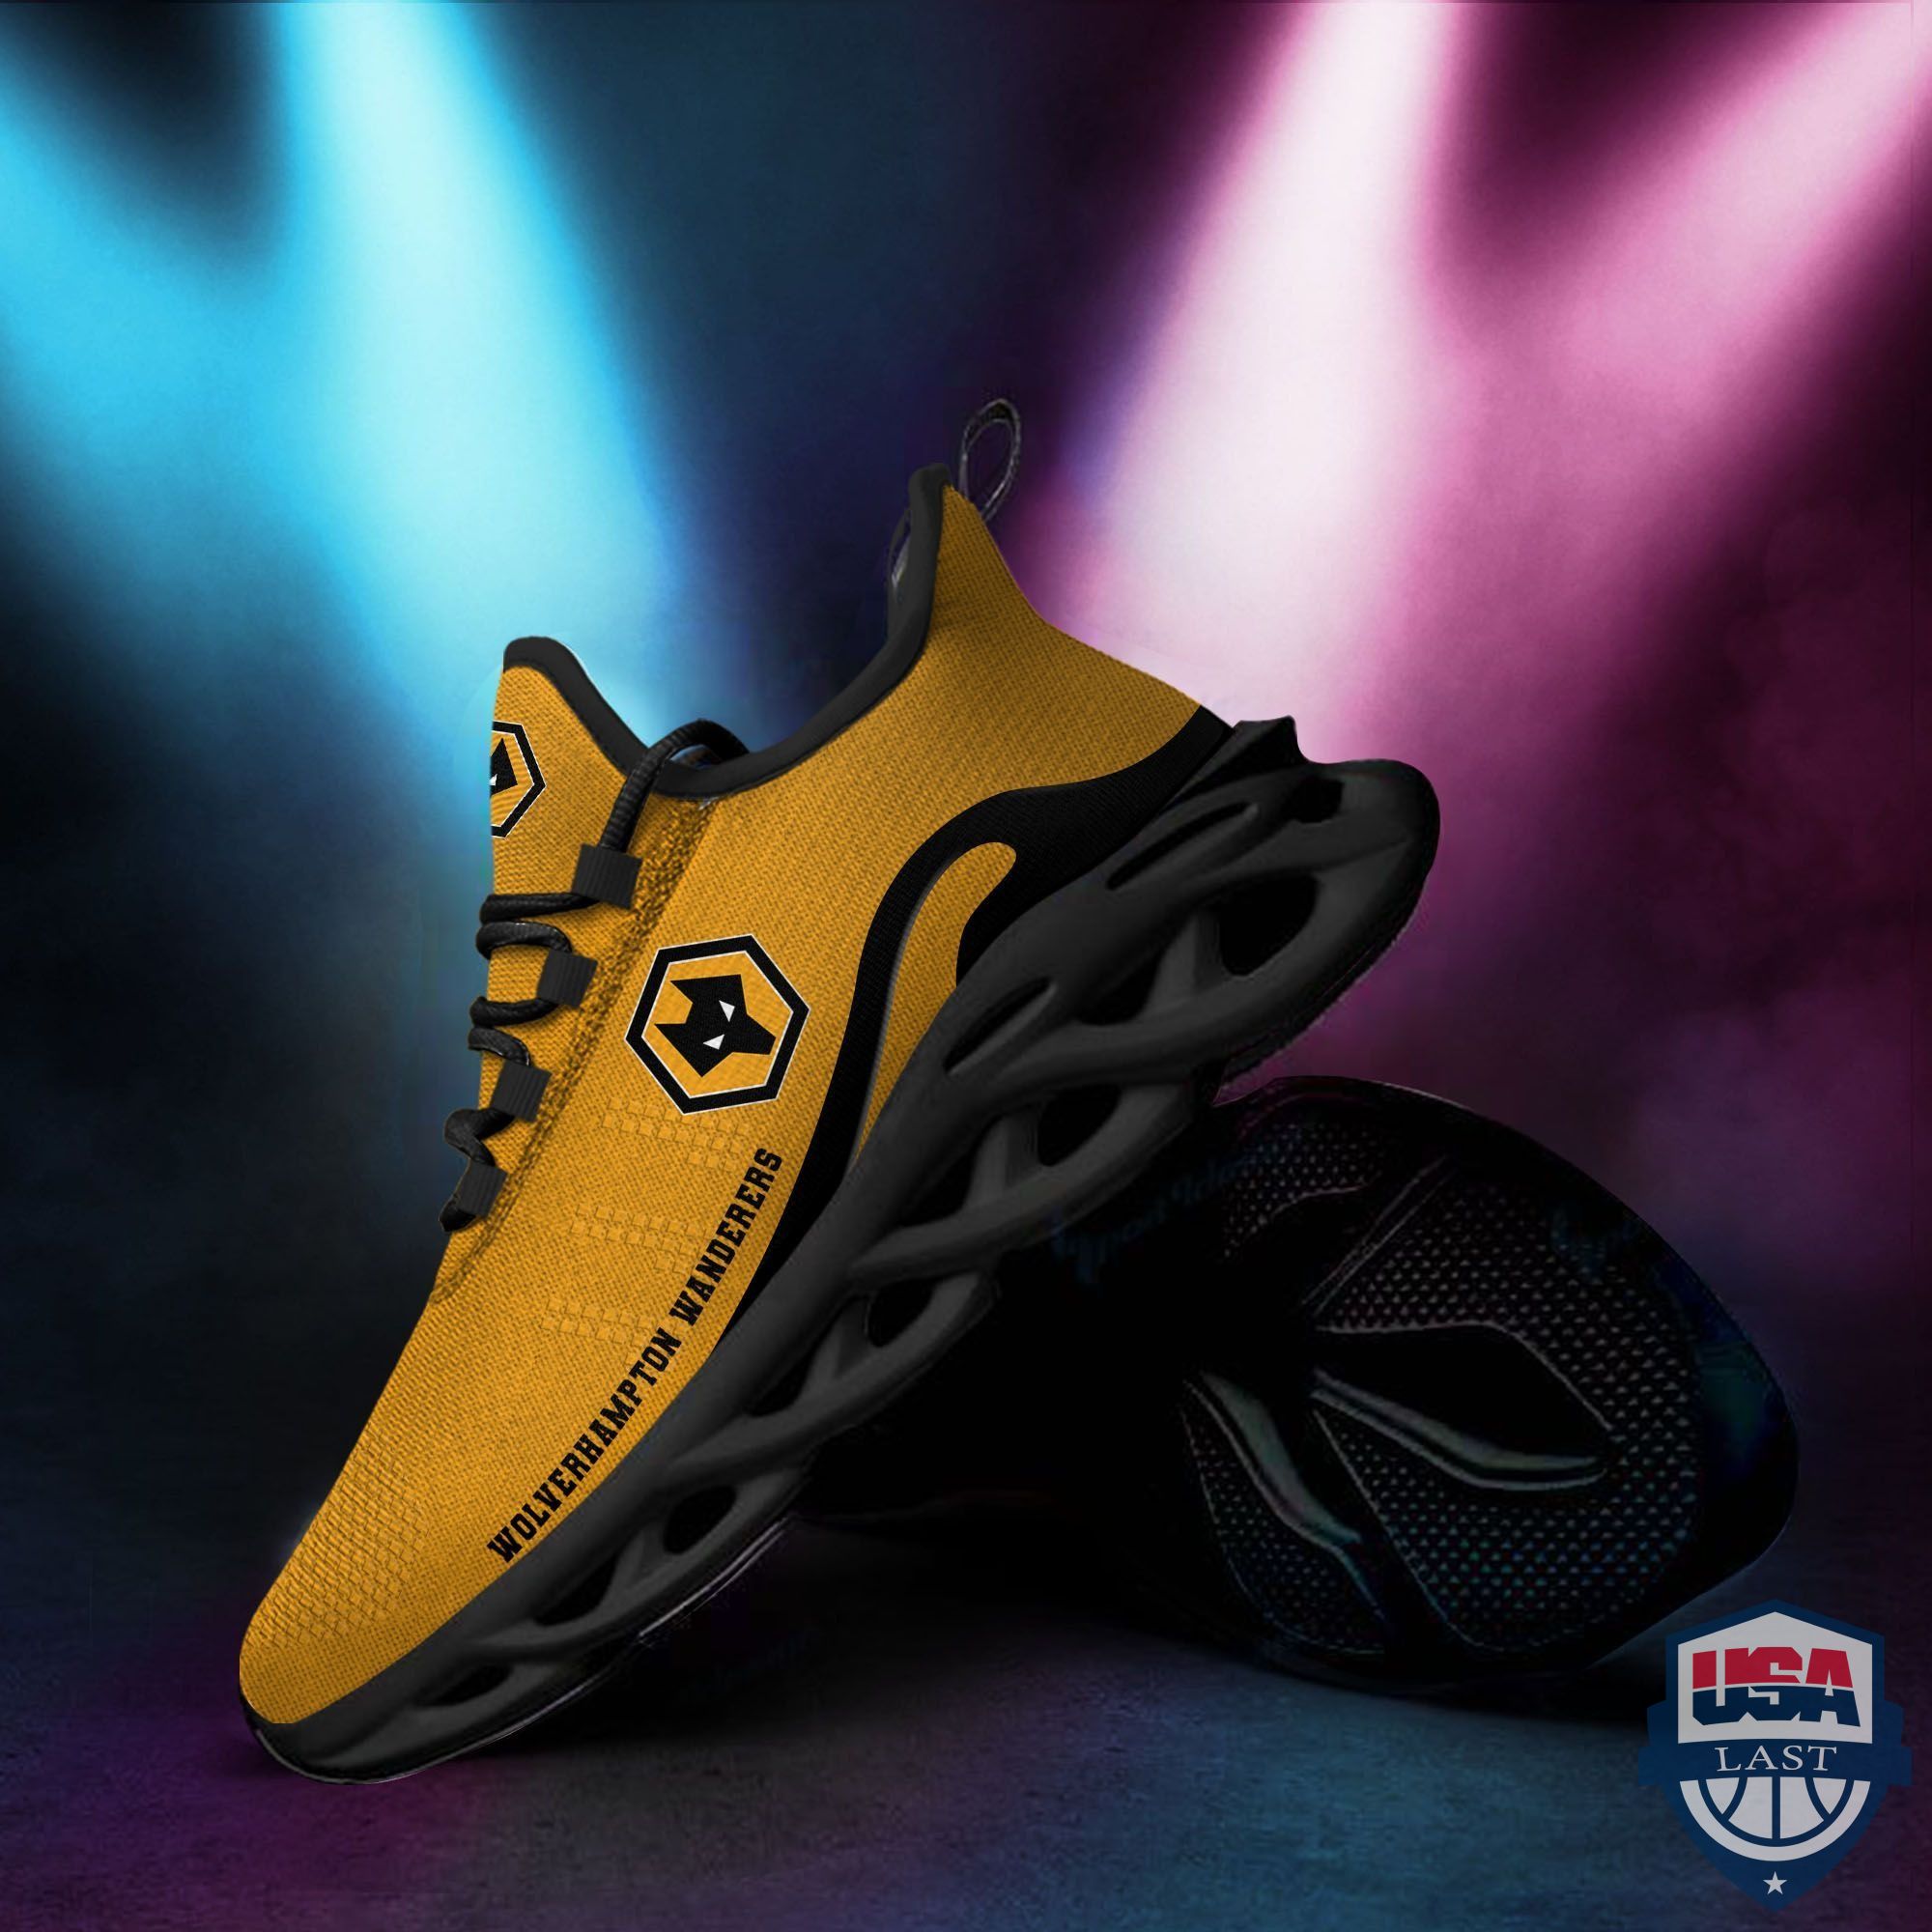 EPL Arsenal Max Soul Clunky Sneaker Shoes